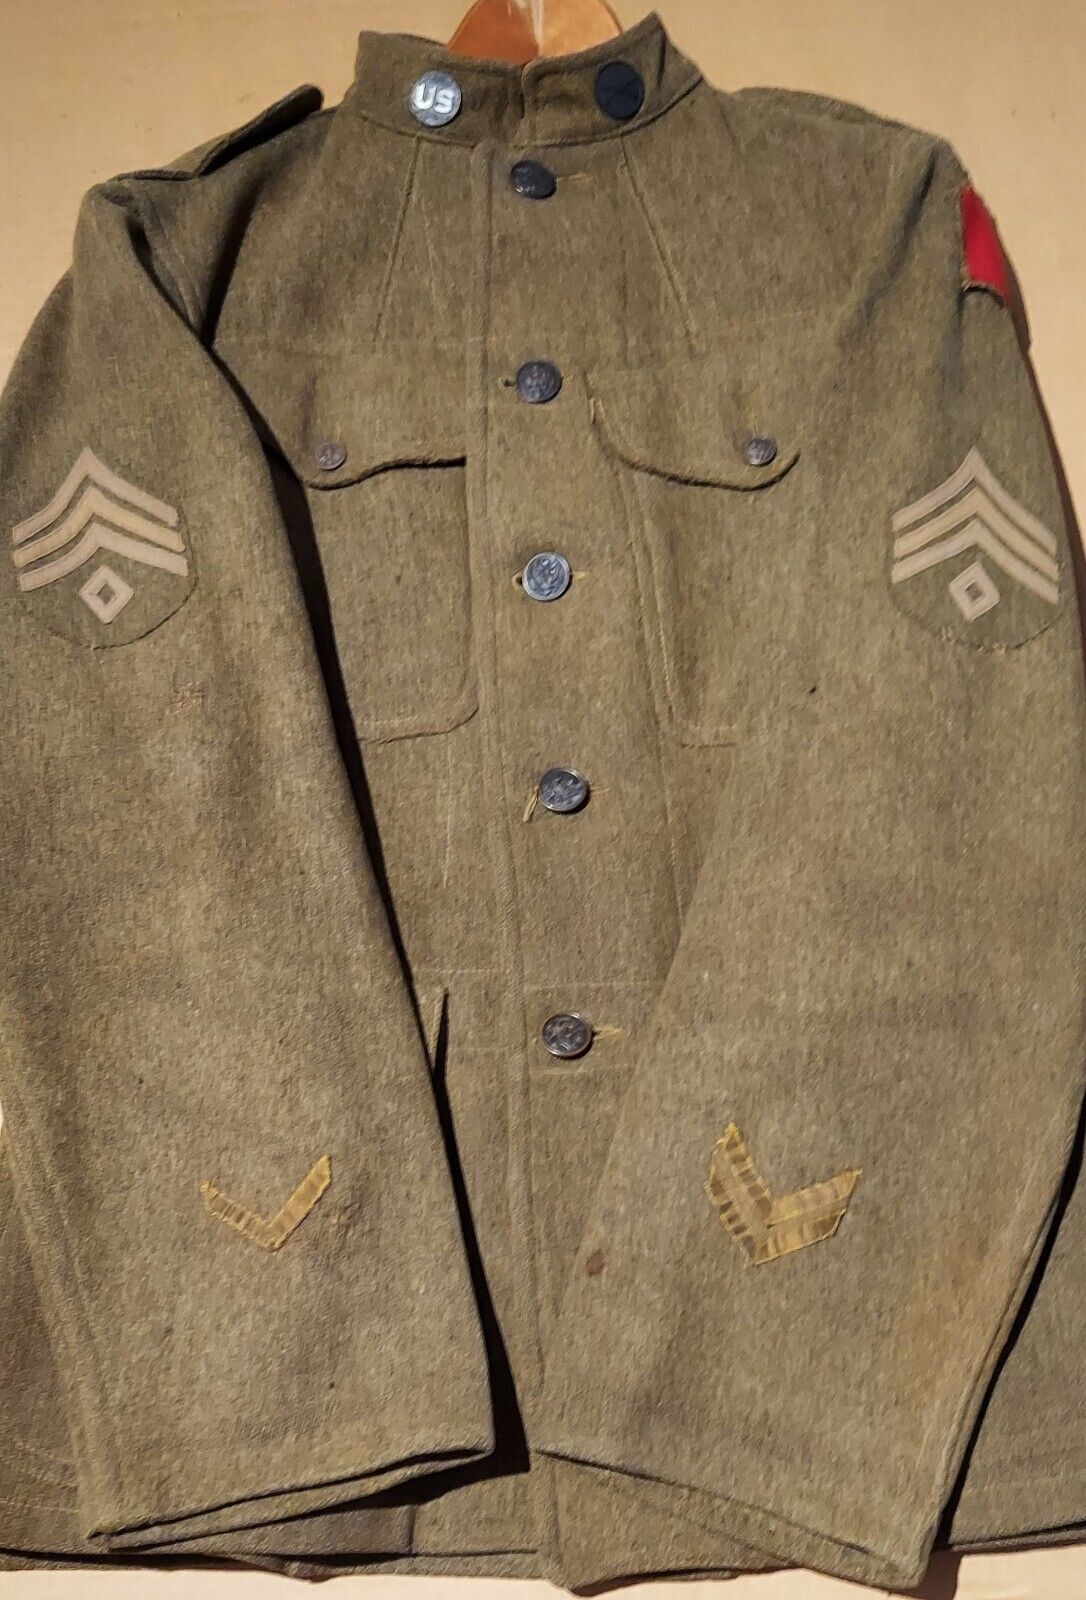 Original WWI U.S. Army Tunic Jacket - 28th Infantry Division \